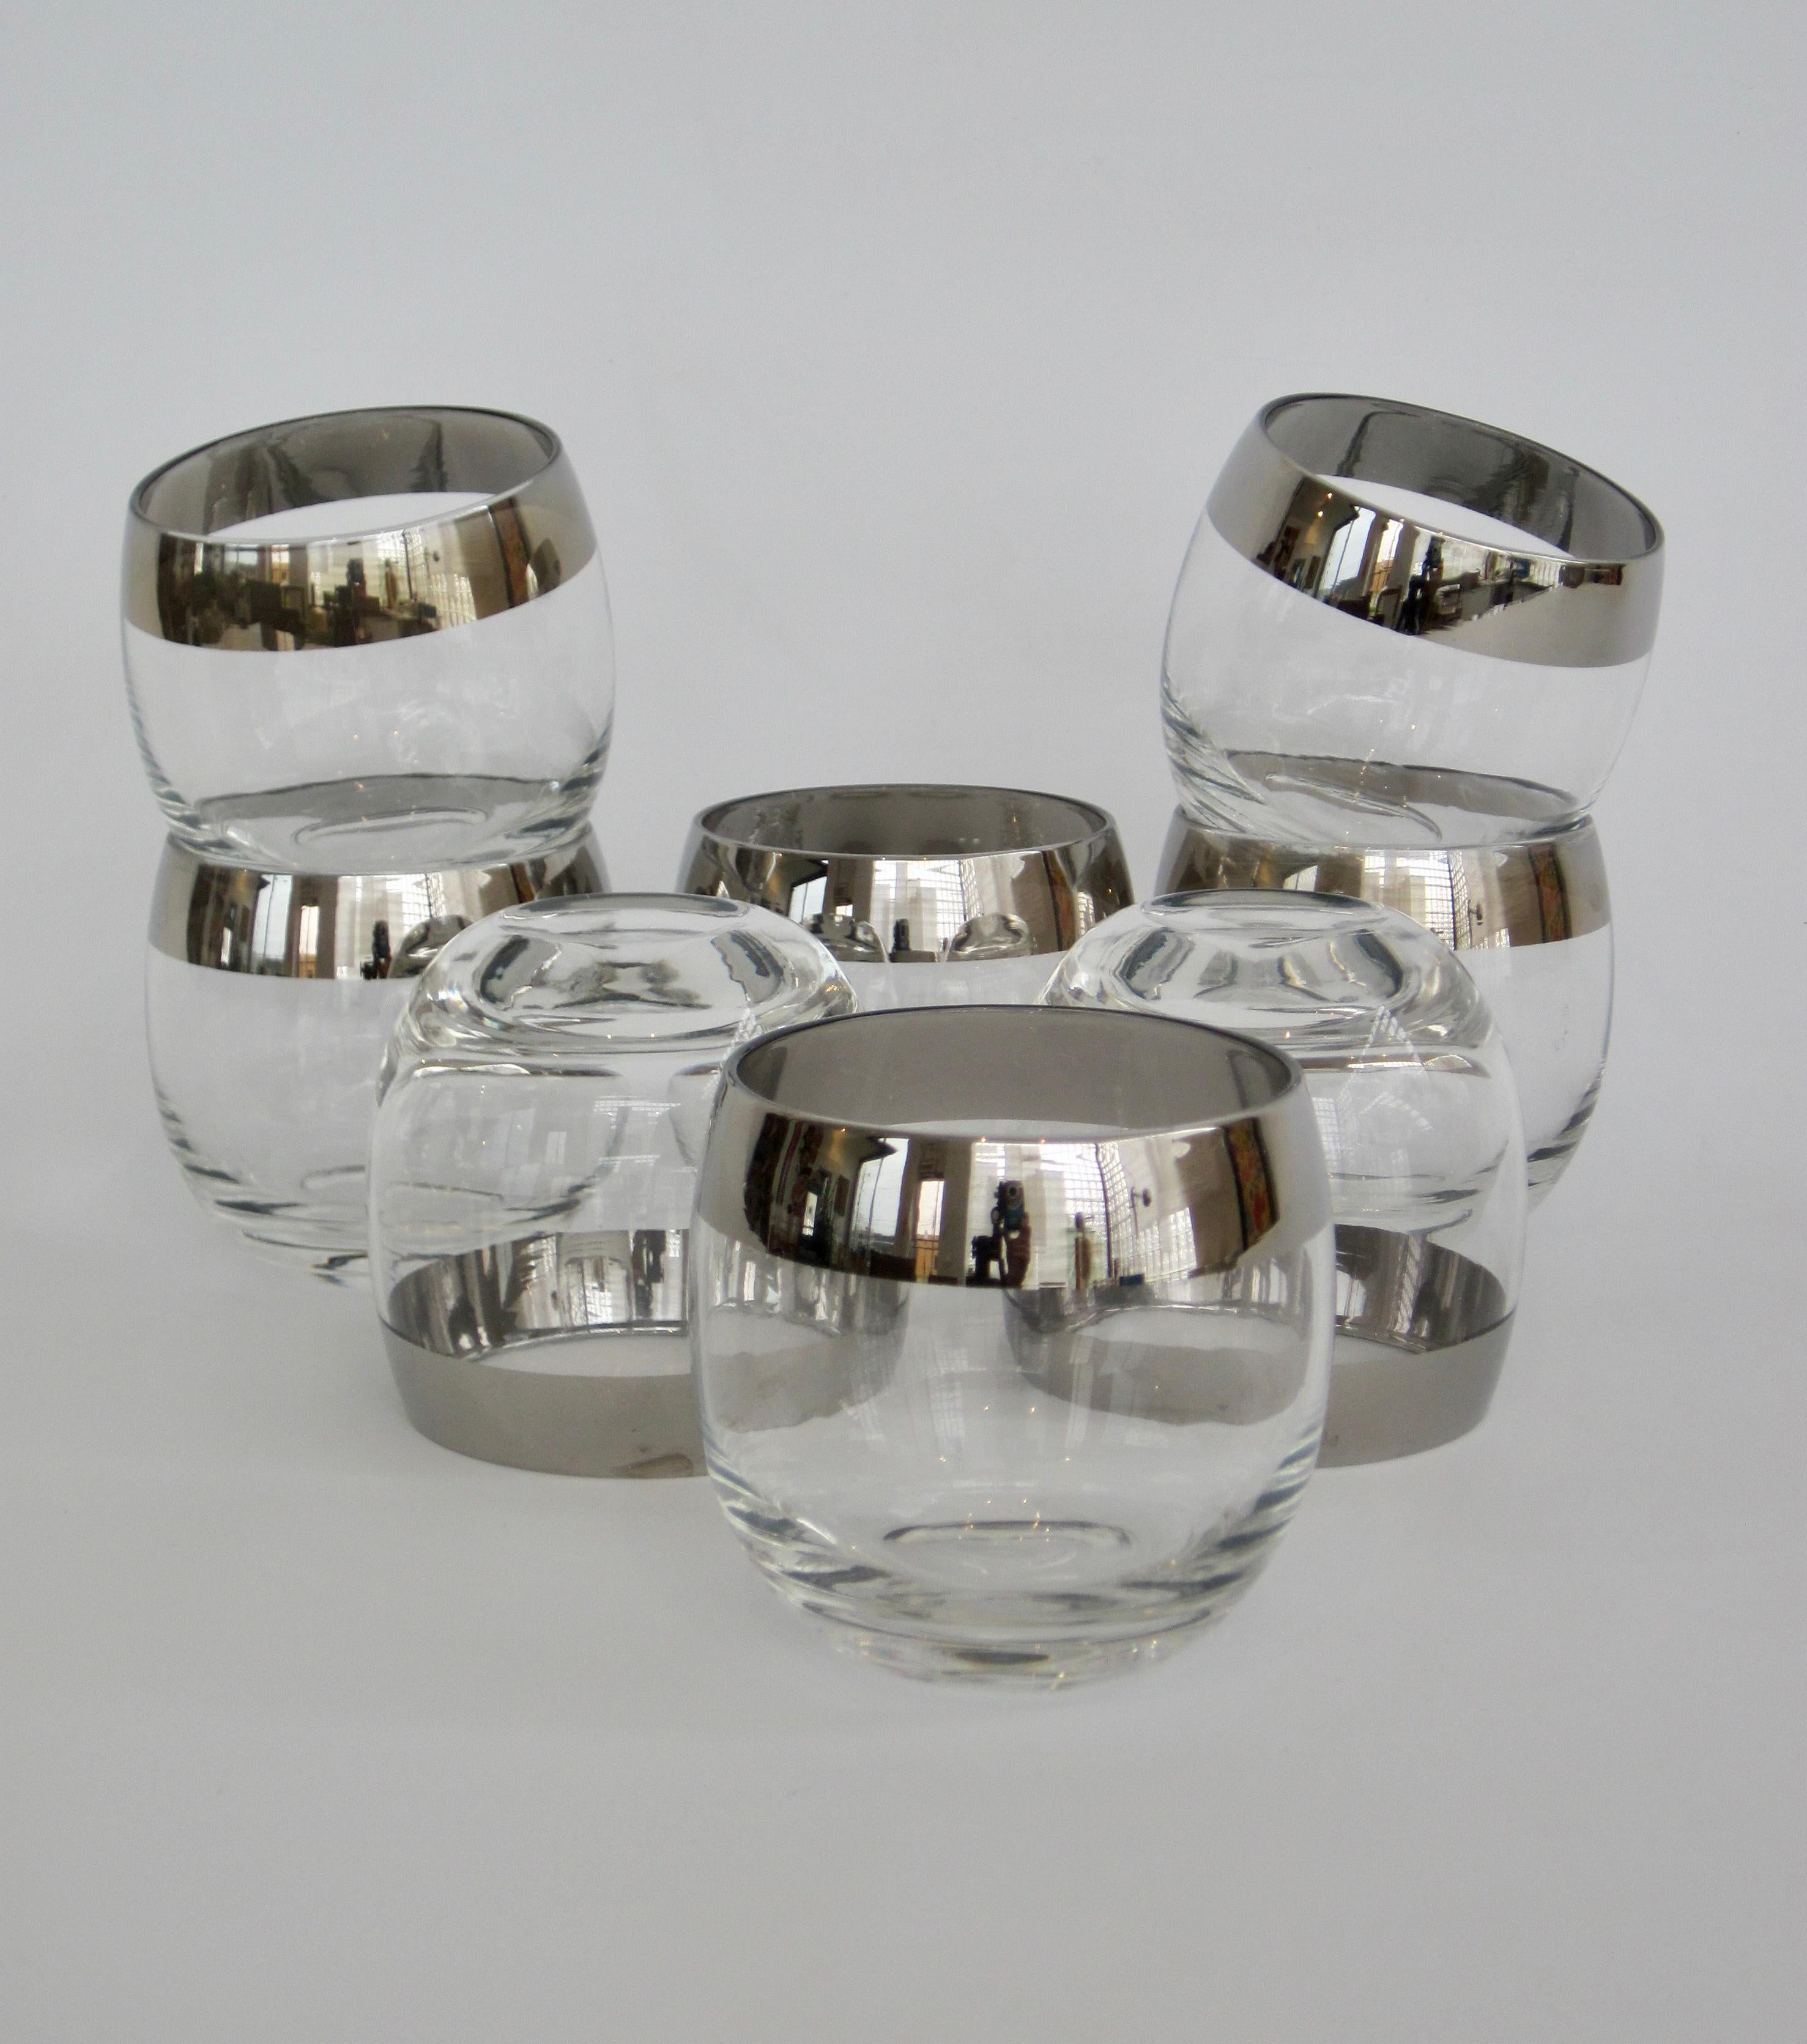 A set of eight Dorothy Thorpe 6oz. roly poly rocks cocktail glasses. The Mid-Century Modern design is a classy touch for any bar.